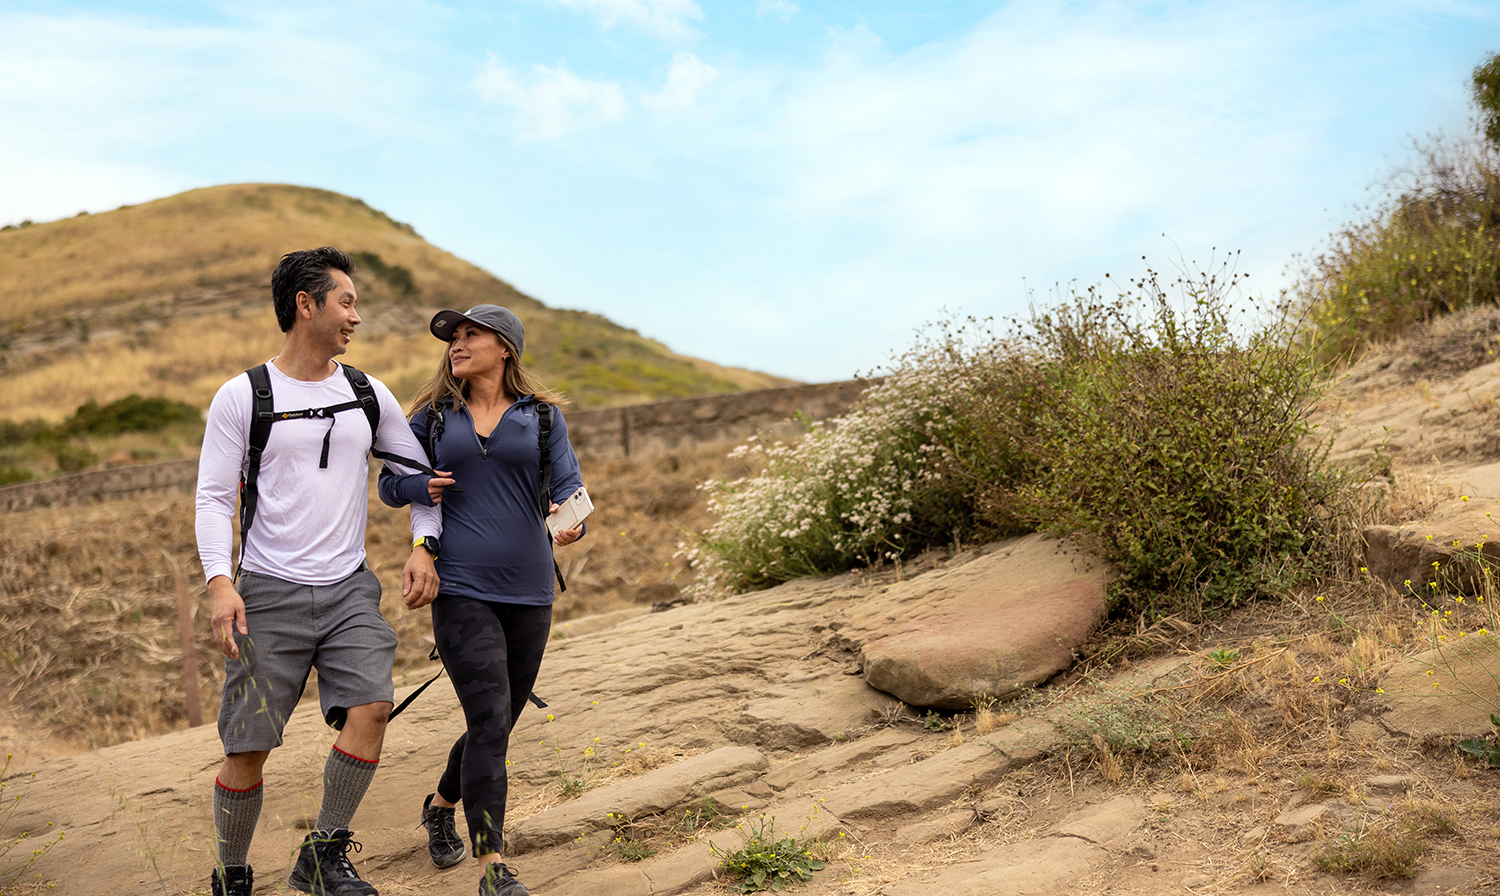 A man and woman hiking on a dirt trail.